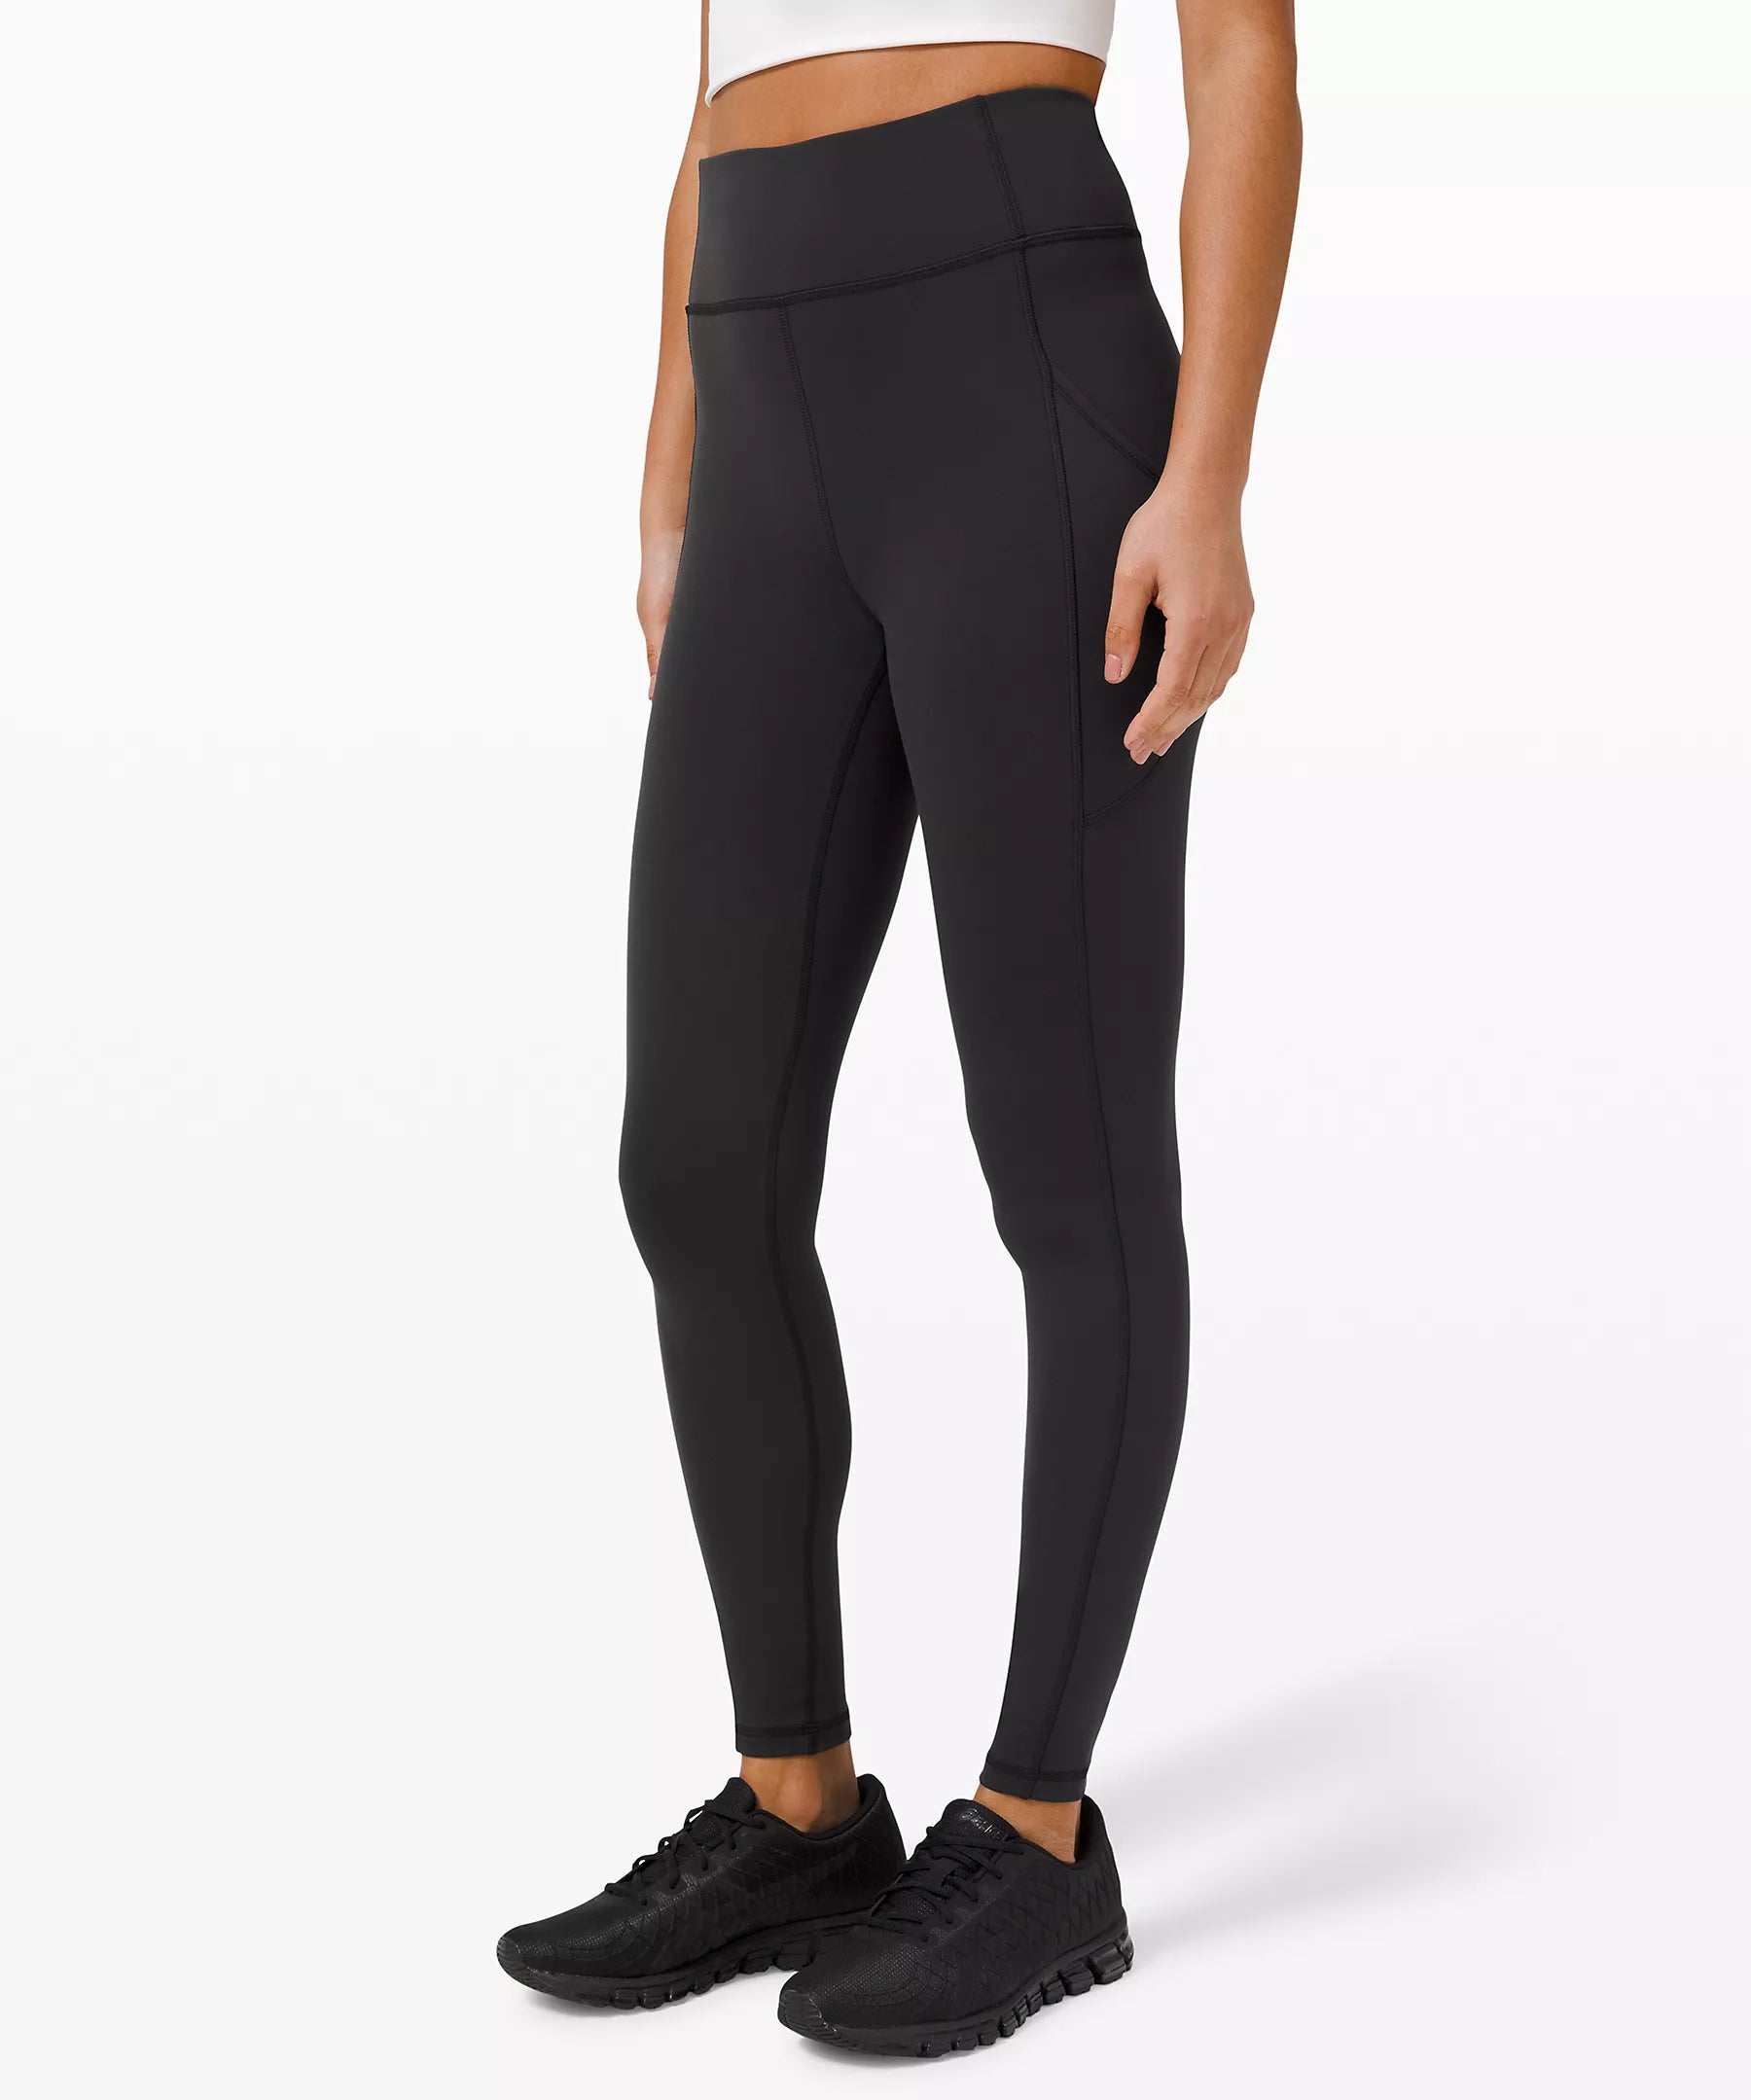 SOFTREME. Black Ultrasoft Leggings with side pockets – Pineapple Athleisure